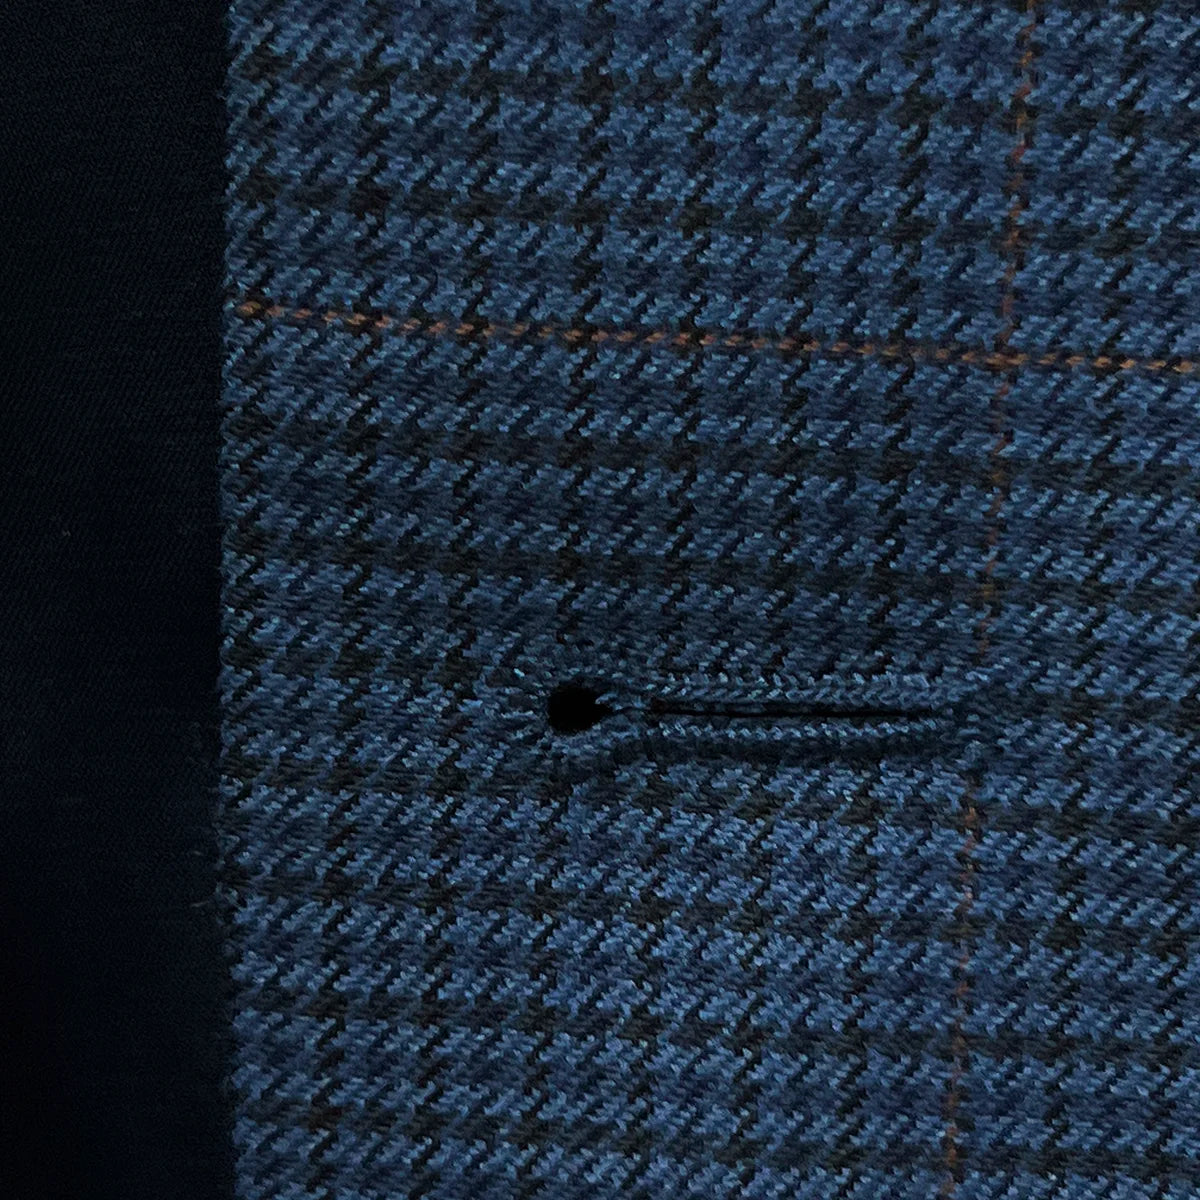 Detailed view of the buttonhole stitching on the prussian blue suit jacket, showcasing the quality and durability.